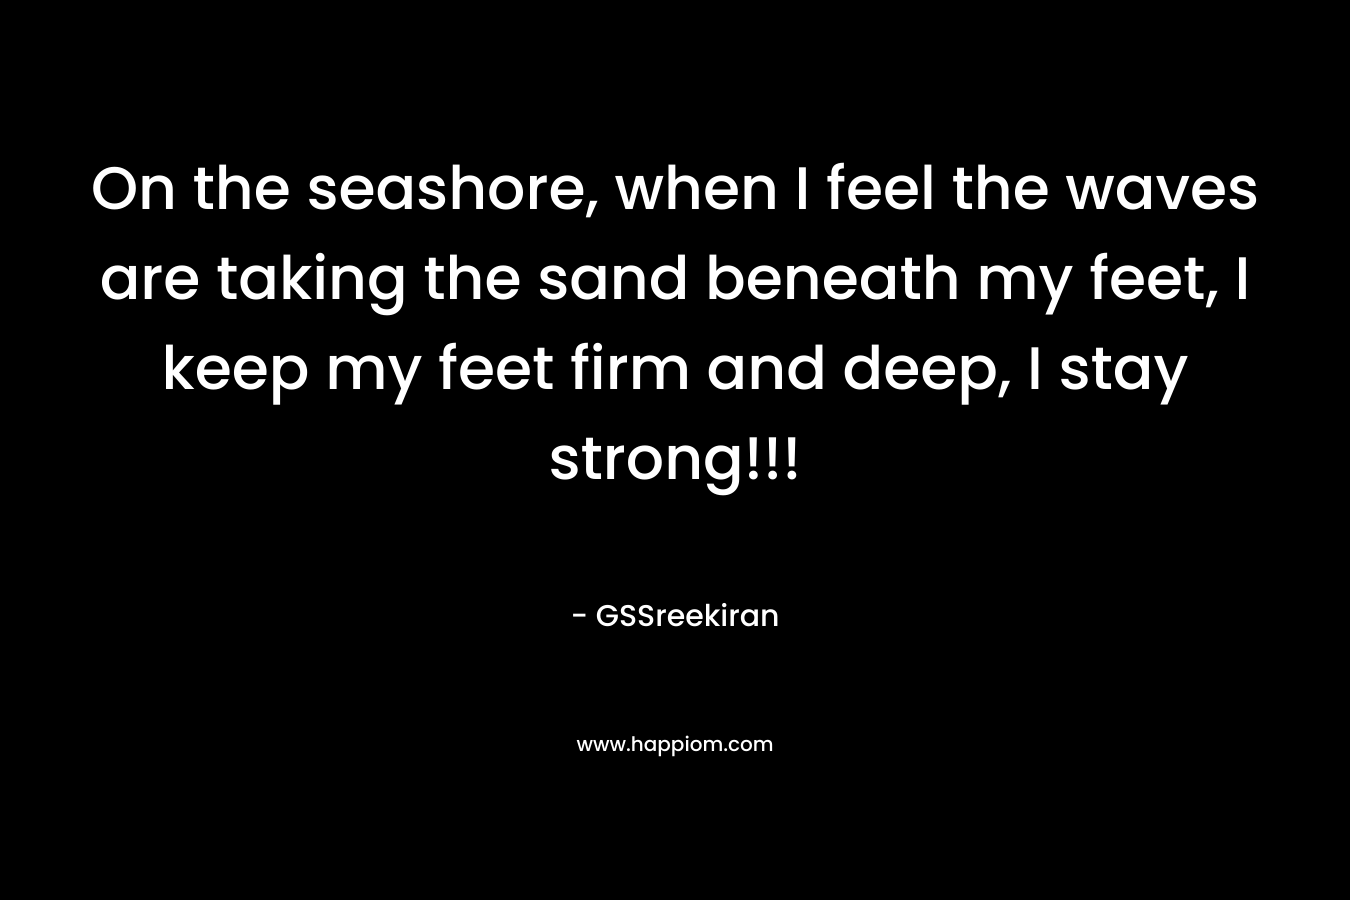 On the seashore, when I feel the waves are taking the sand beneath my feet, I keep my feet firm and deep, I stay strong!!!